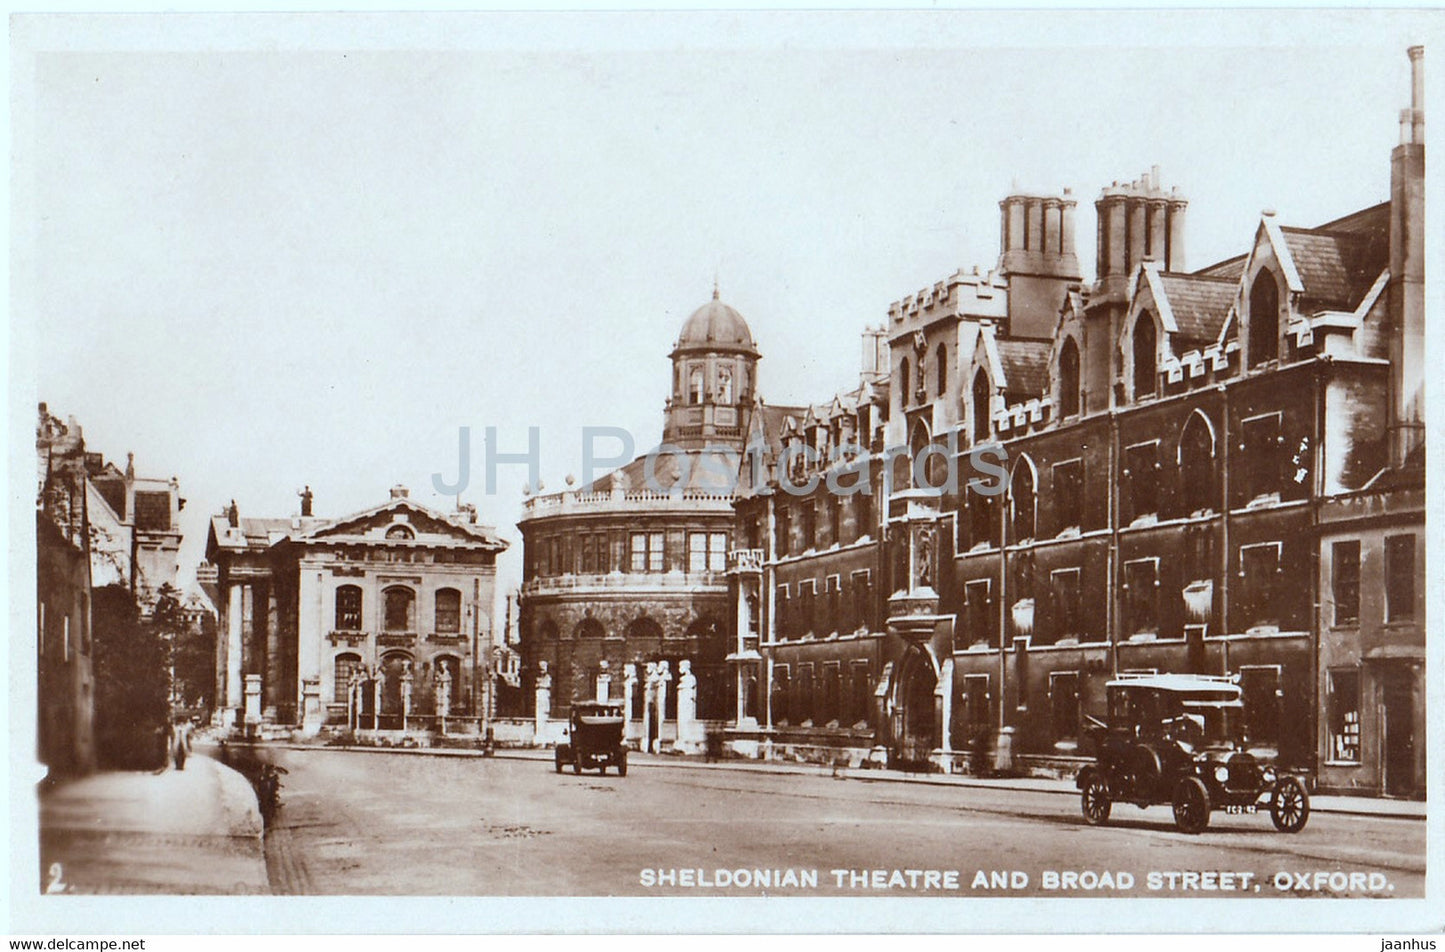 Oxford - Sheldonian Theatre and Broad Street - old car - old postcard - England - United Kingdom - unused - JH Postcards